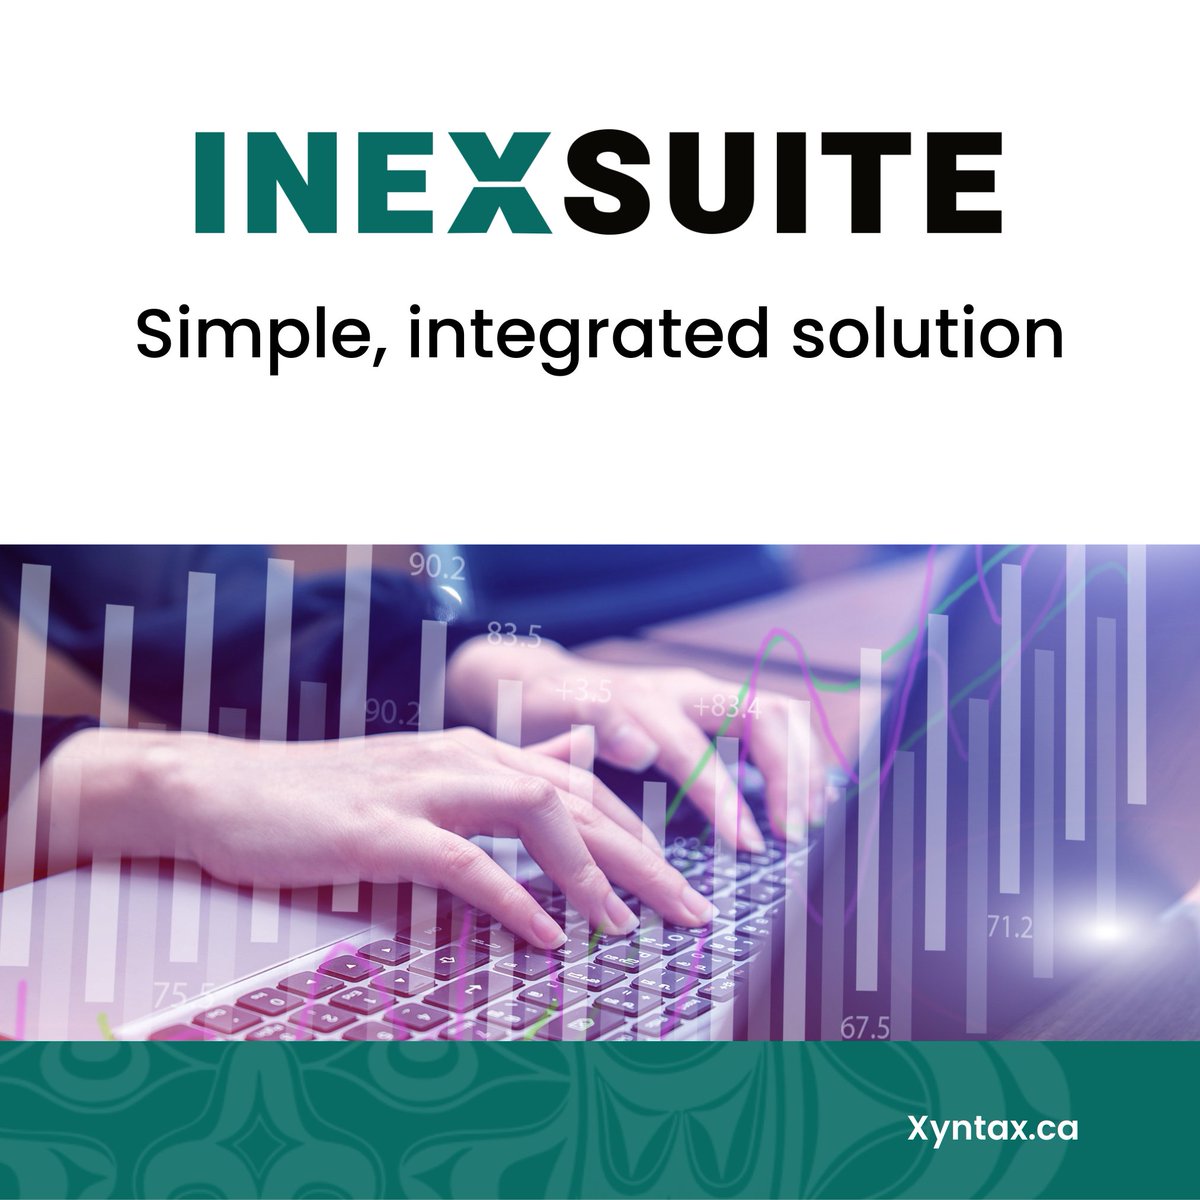 INEXSUITE: Simple, integrated solutions for the way you work. Seamlessly share data between modules, navigate effortlessly, and focus on what matters most. 🔄💼

#IntegratedSolutions #WorkEfficiency